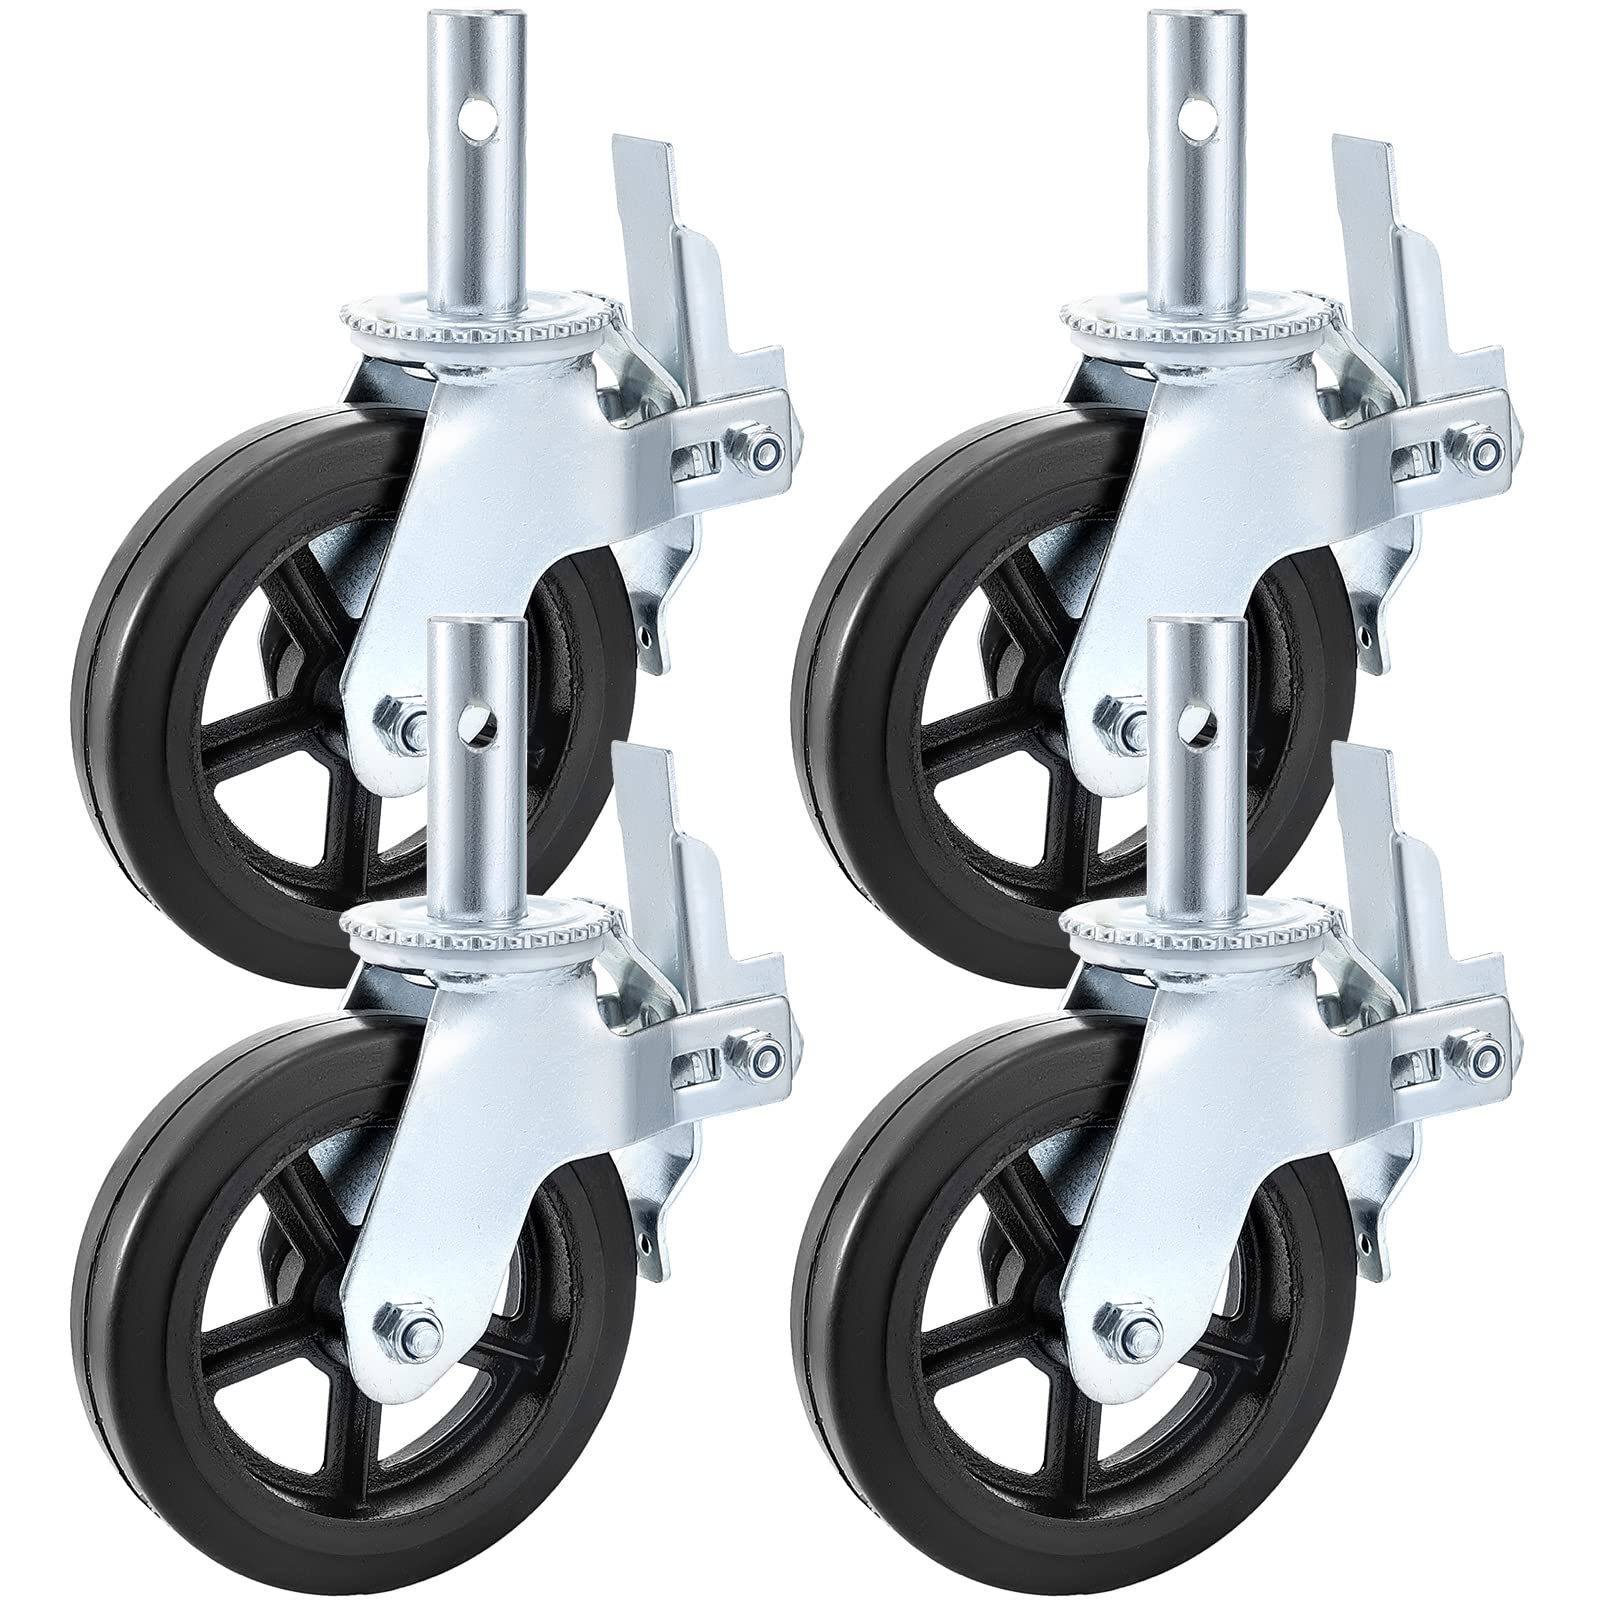 BestEquip 4 Pack Scaffolding Caster Wheels 8 x 2 Inch with Dual Locking Rubber Swivel Caster 360 Degrees Heavy Duty Casters 1100LBS Capacity per Wheel